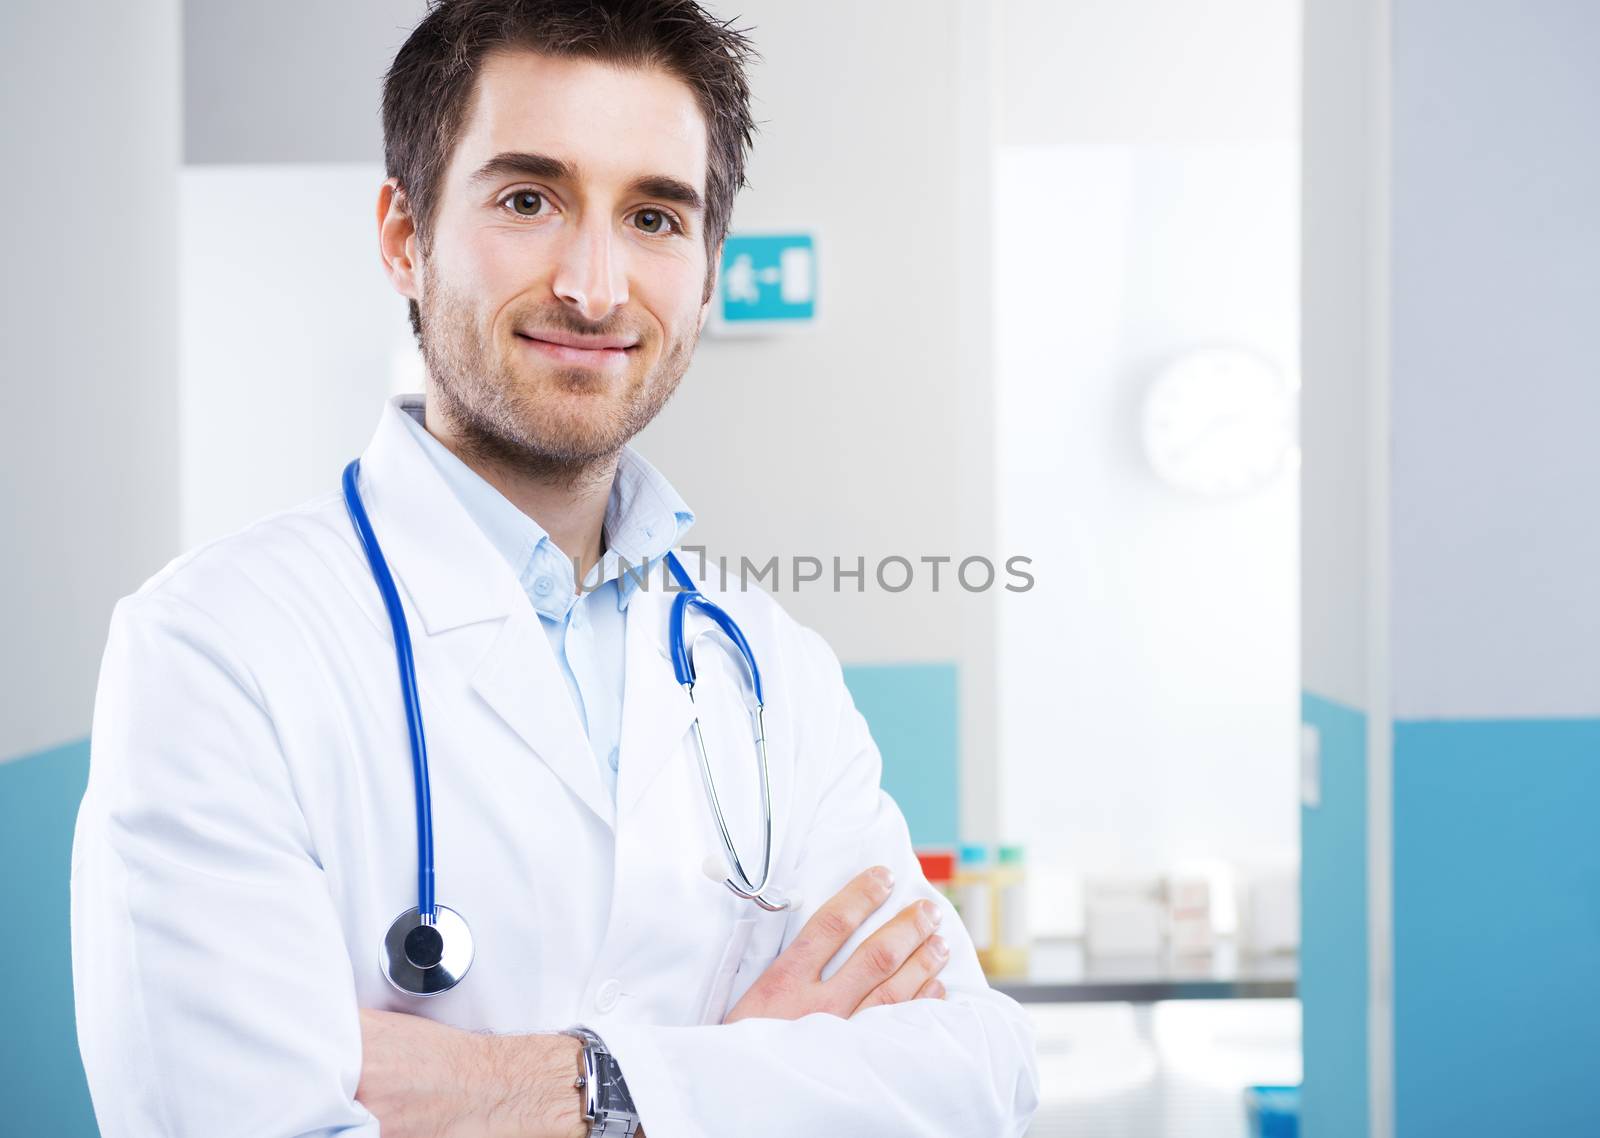 Young professional doctor at hospital with crossed arms